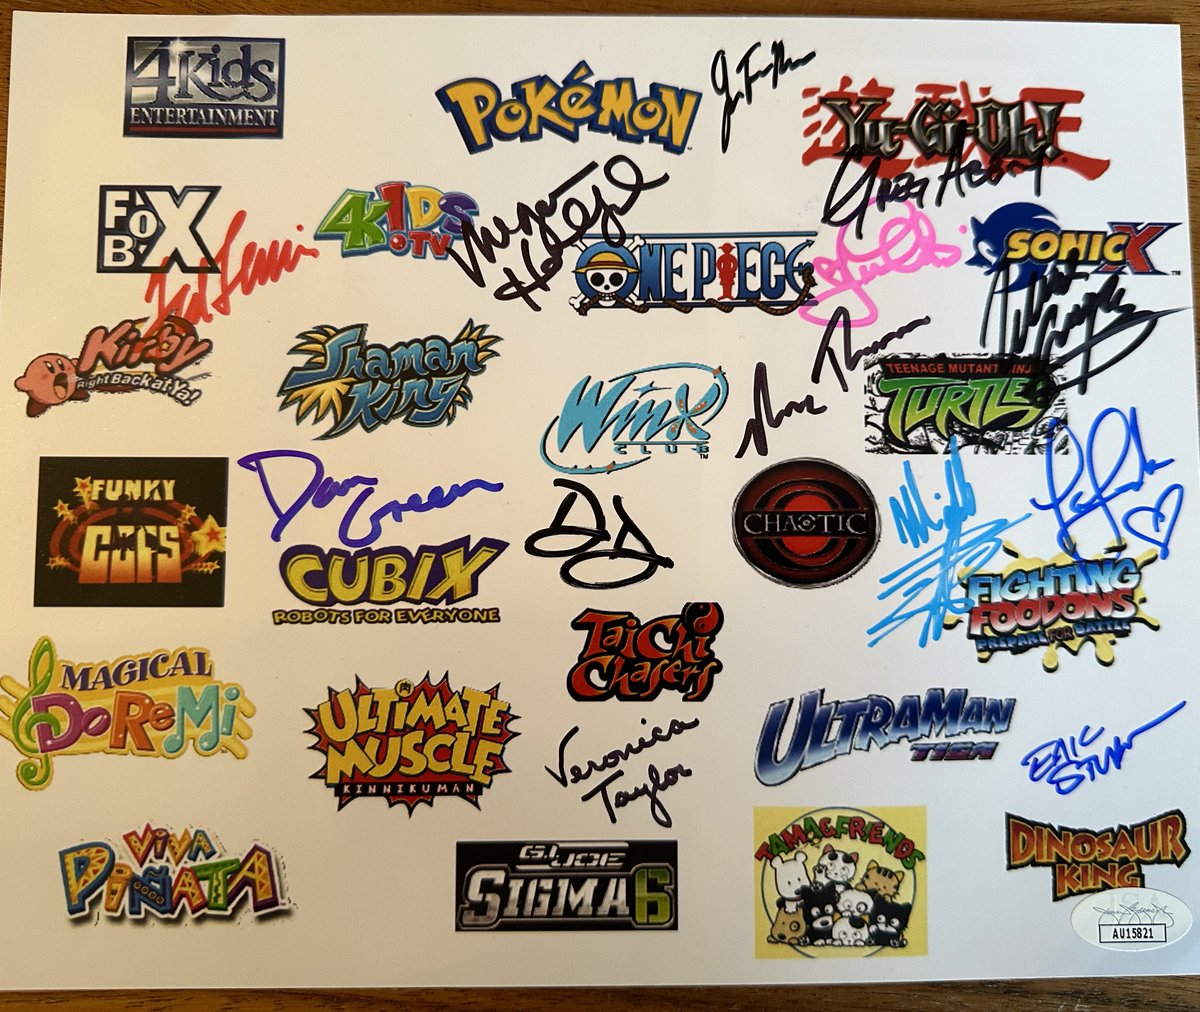 Something we wanted to do w/ @4KidsFlashback is raise money for charity - so I've collected signatures from some friends & put them at ebay.com/usr/flashback4… All money raised goes directly from ebay to charities that cast members have approved/requested! Happy Shopping!